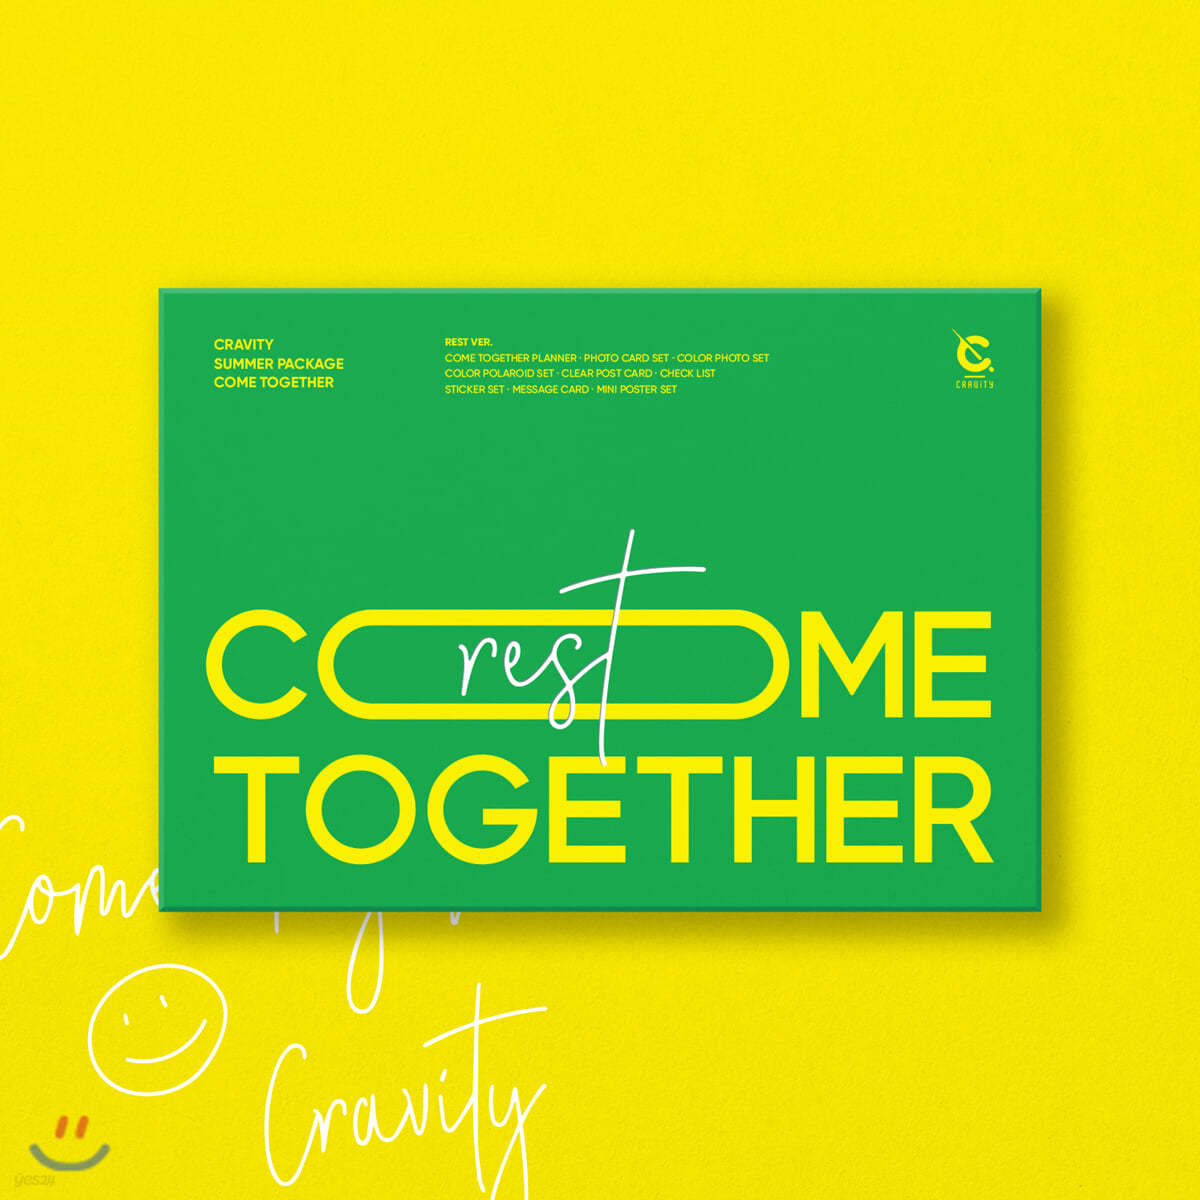 CRAVITY (크래비티) - CRAVITY Summer Package ‘Come Together’ [Rest ver.]